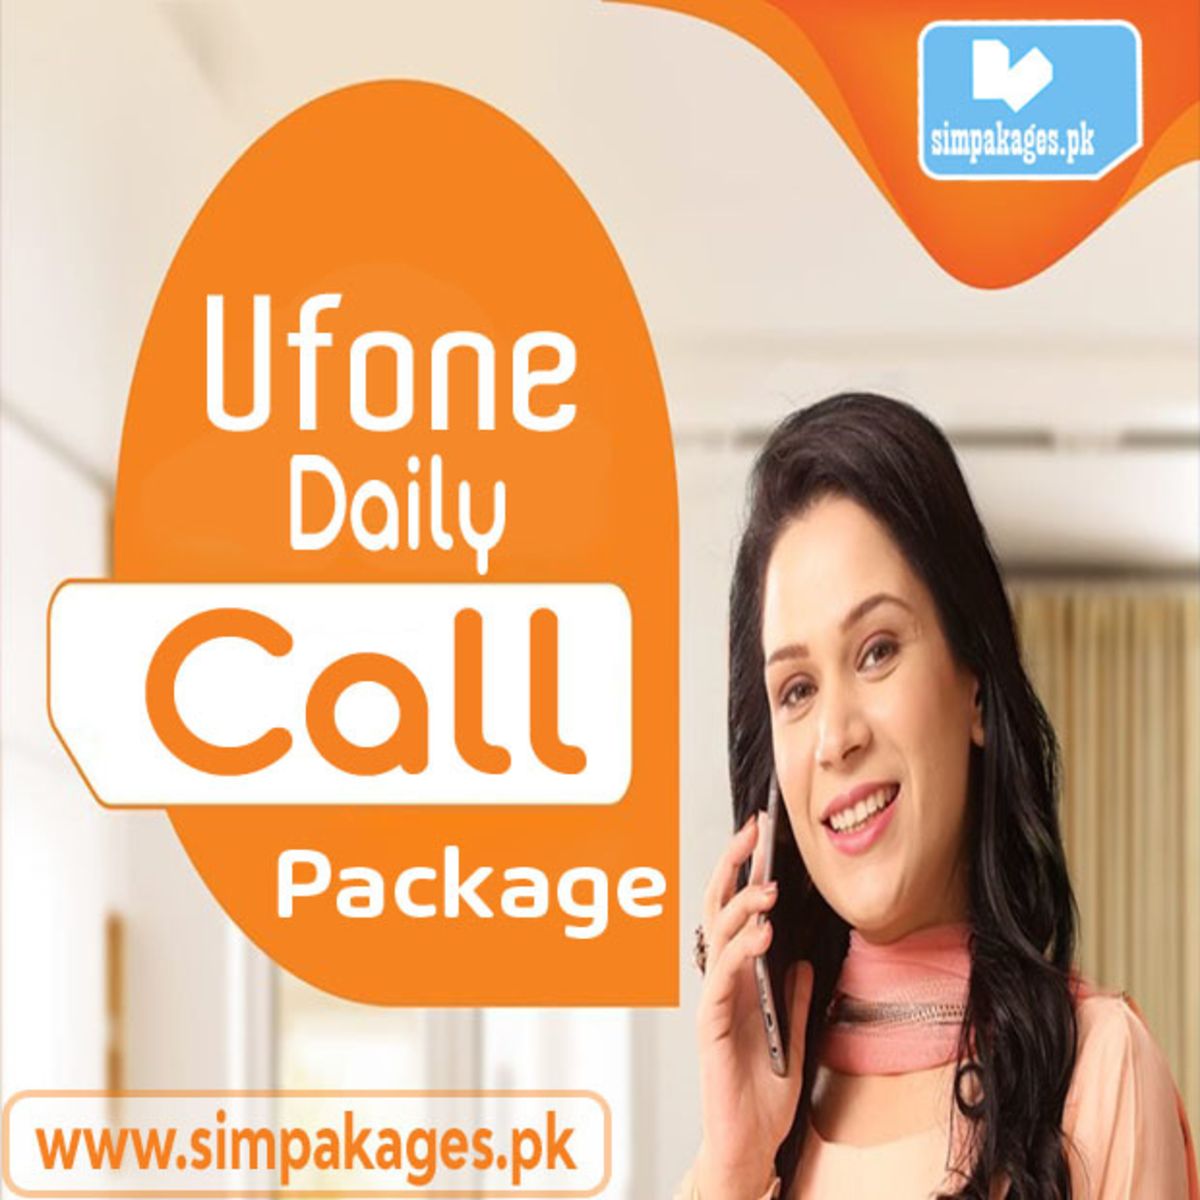 Ufone daily call packages